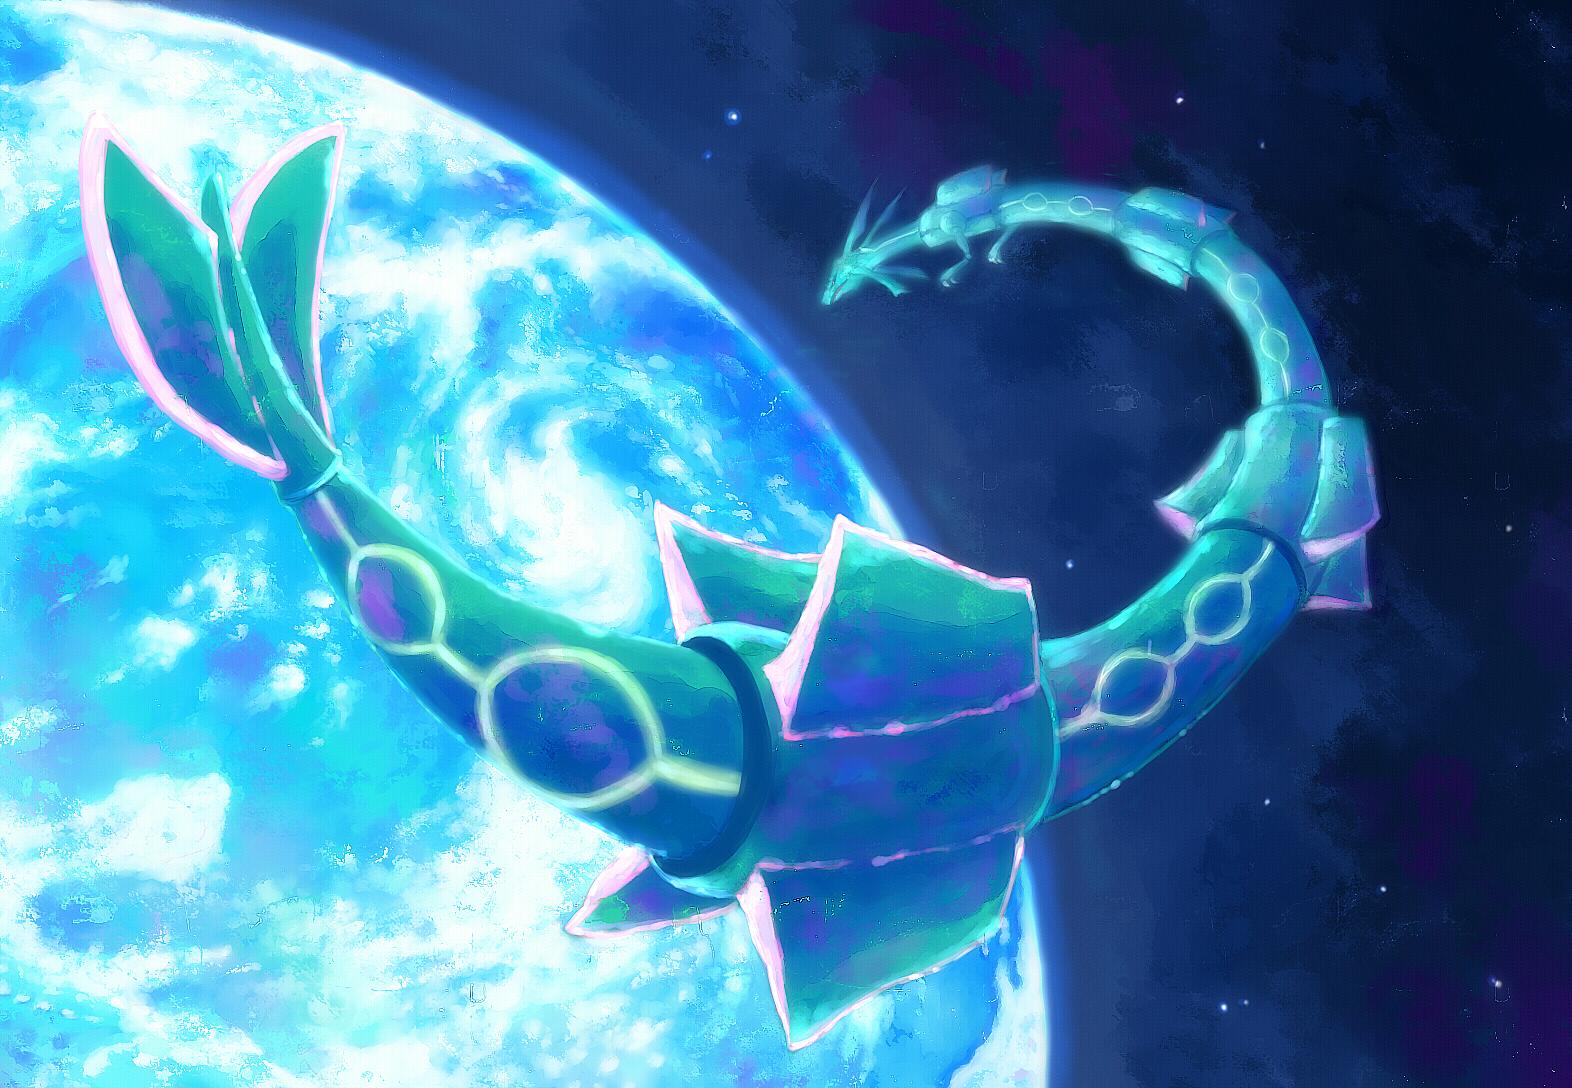 30+ Rayquaza (Pokémon) HD Wallpapers and Backgrounds